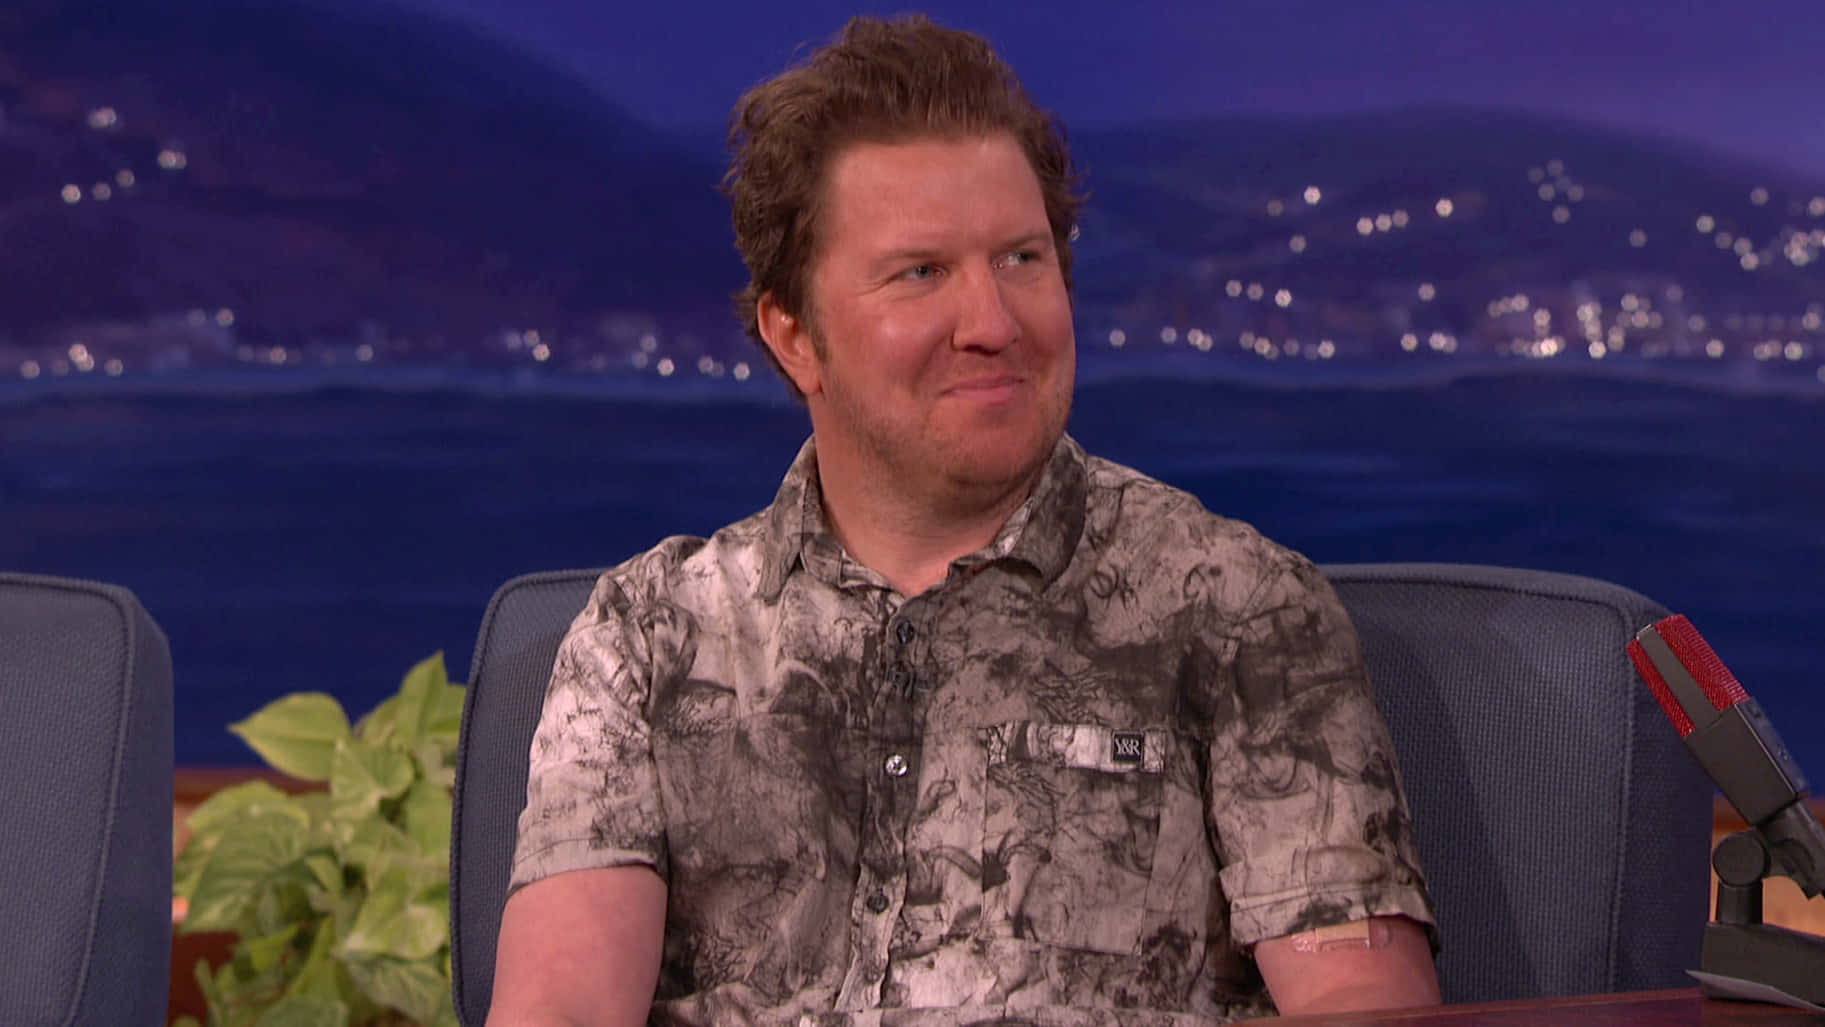 Nick Swardson smiling for the camera. Wallpaper